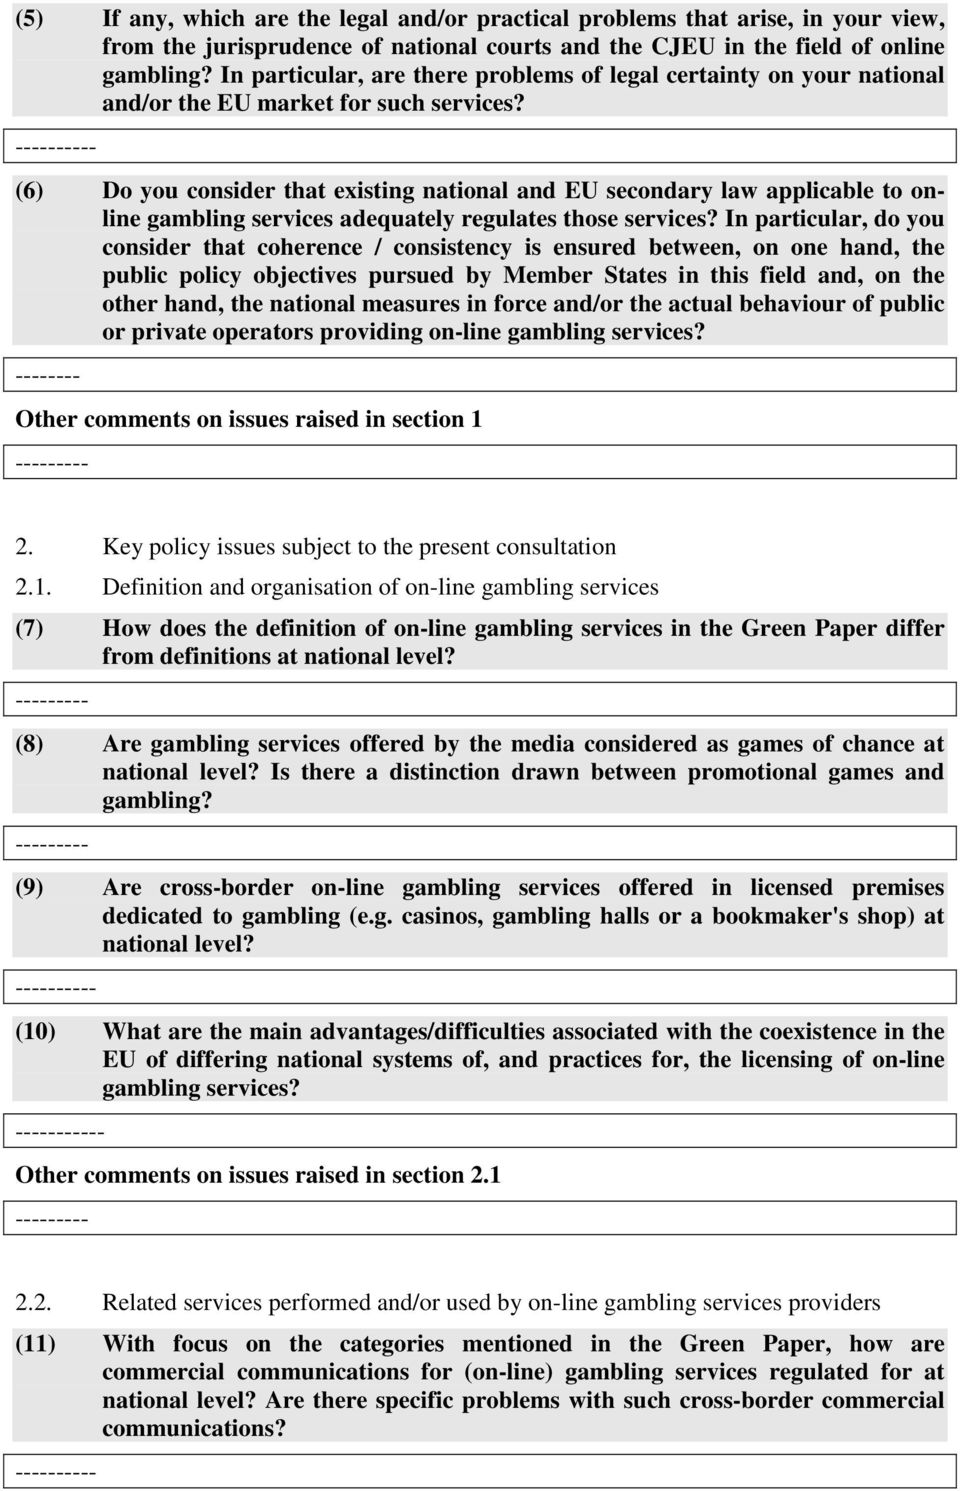 ---------- (6) Do you consider that existing national and EU secondary law applicable to online gambling services adequately regulates those services?